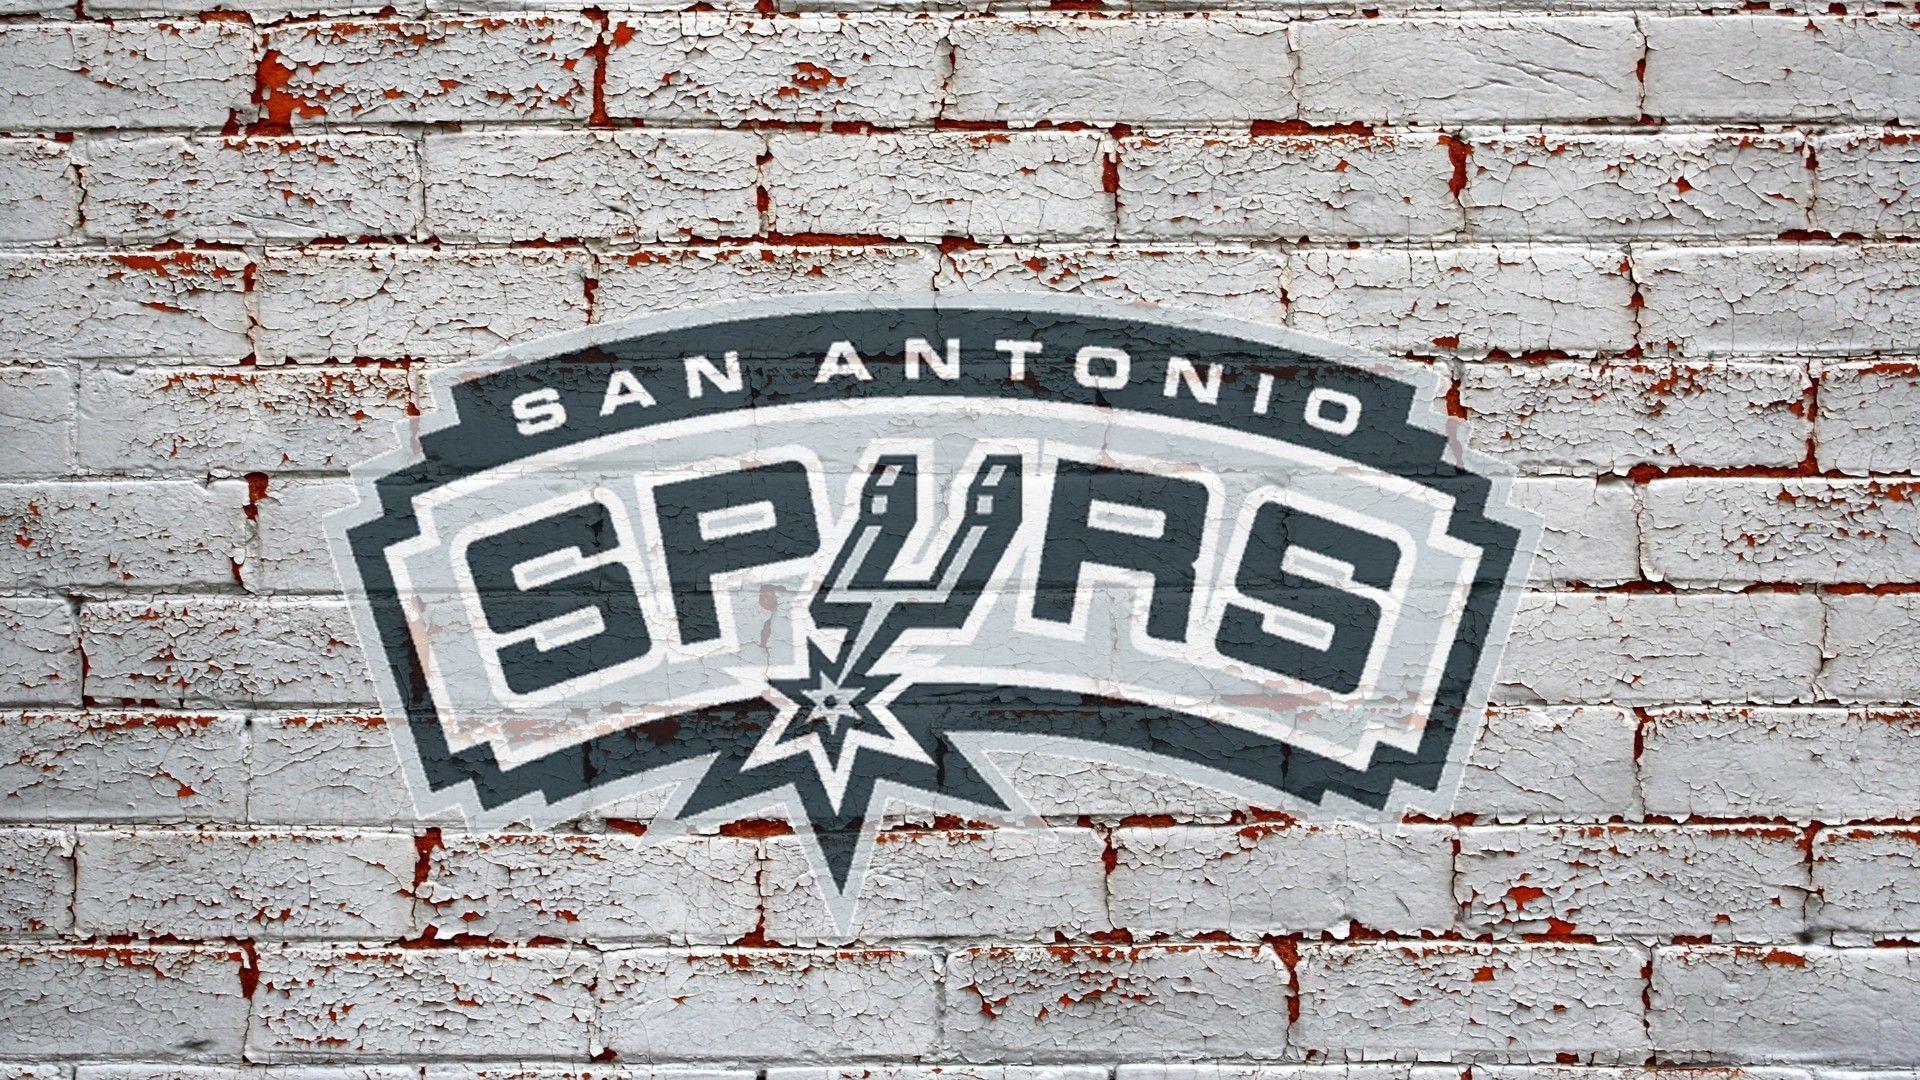 San Antonio Spurs Browser Themes, Wallpaper and More